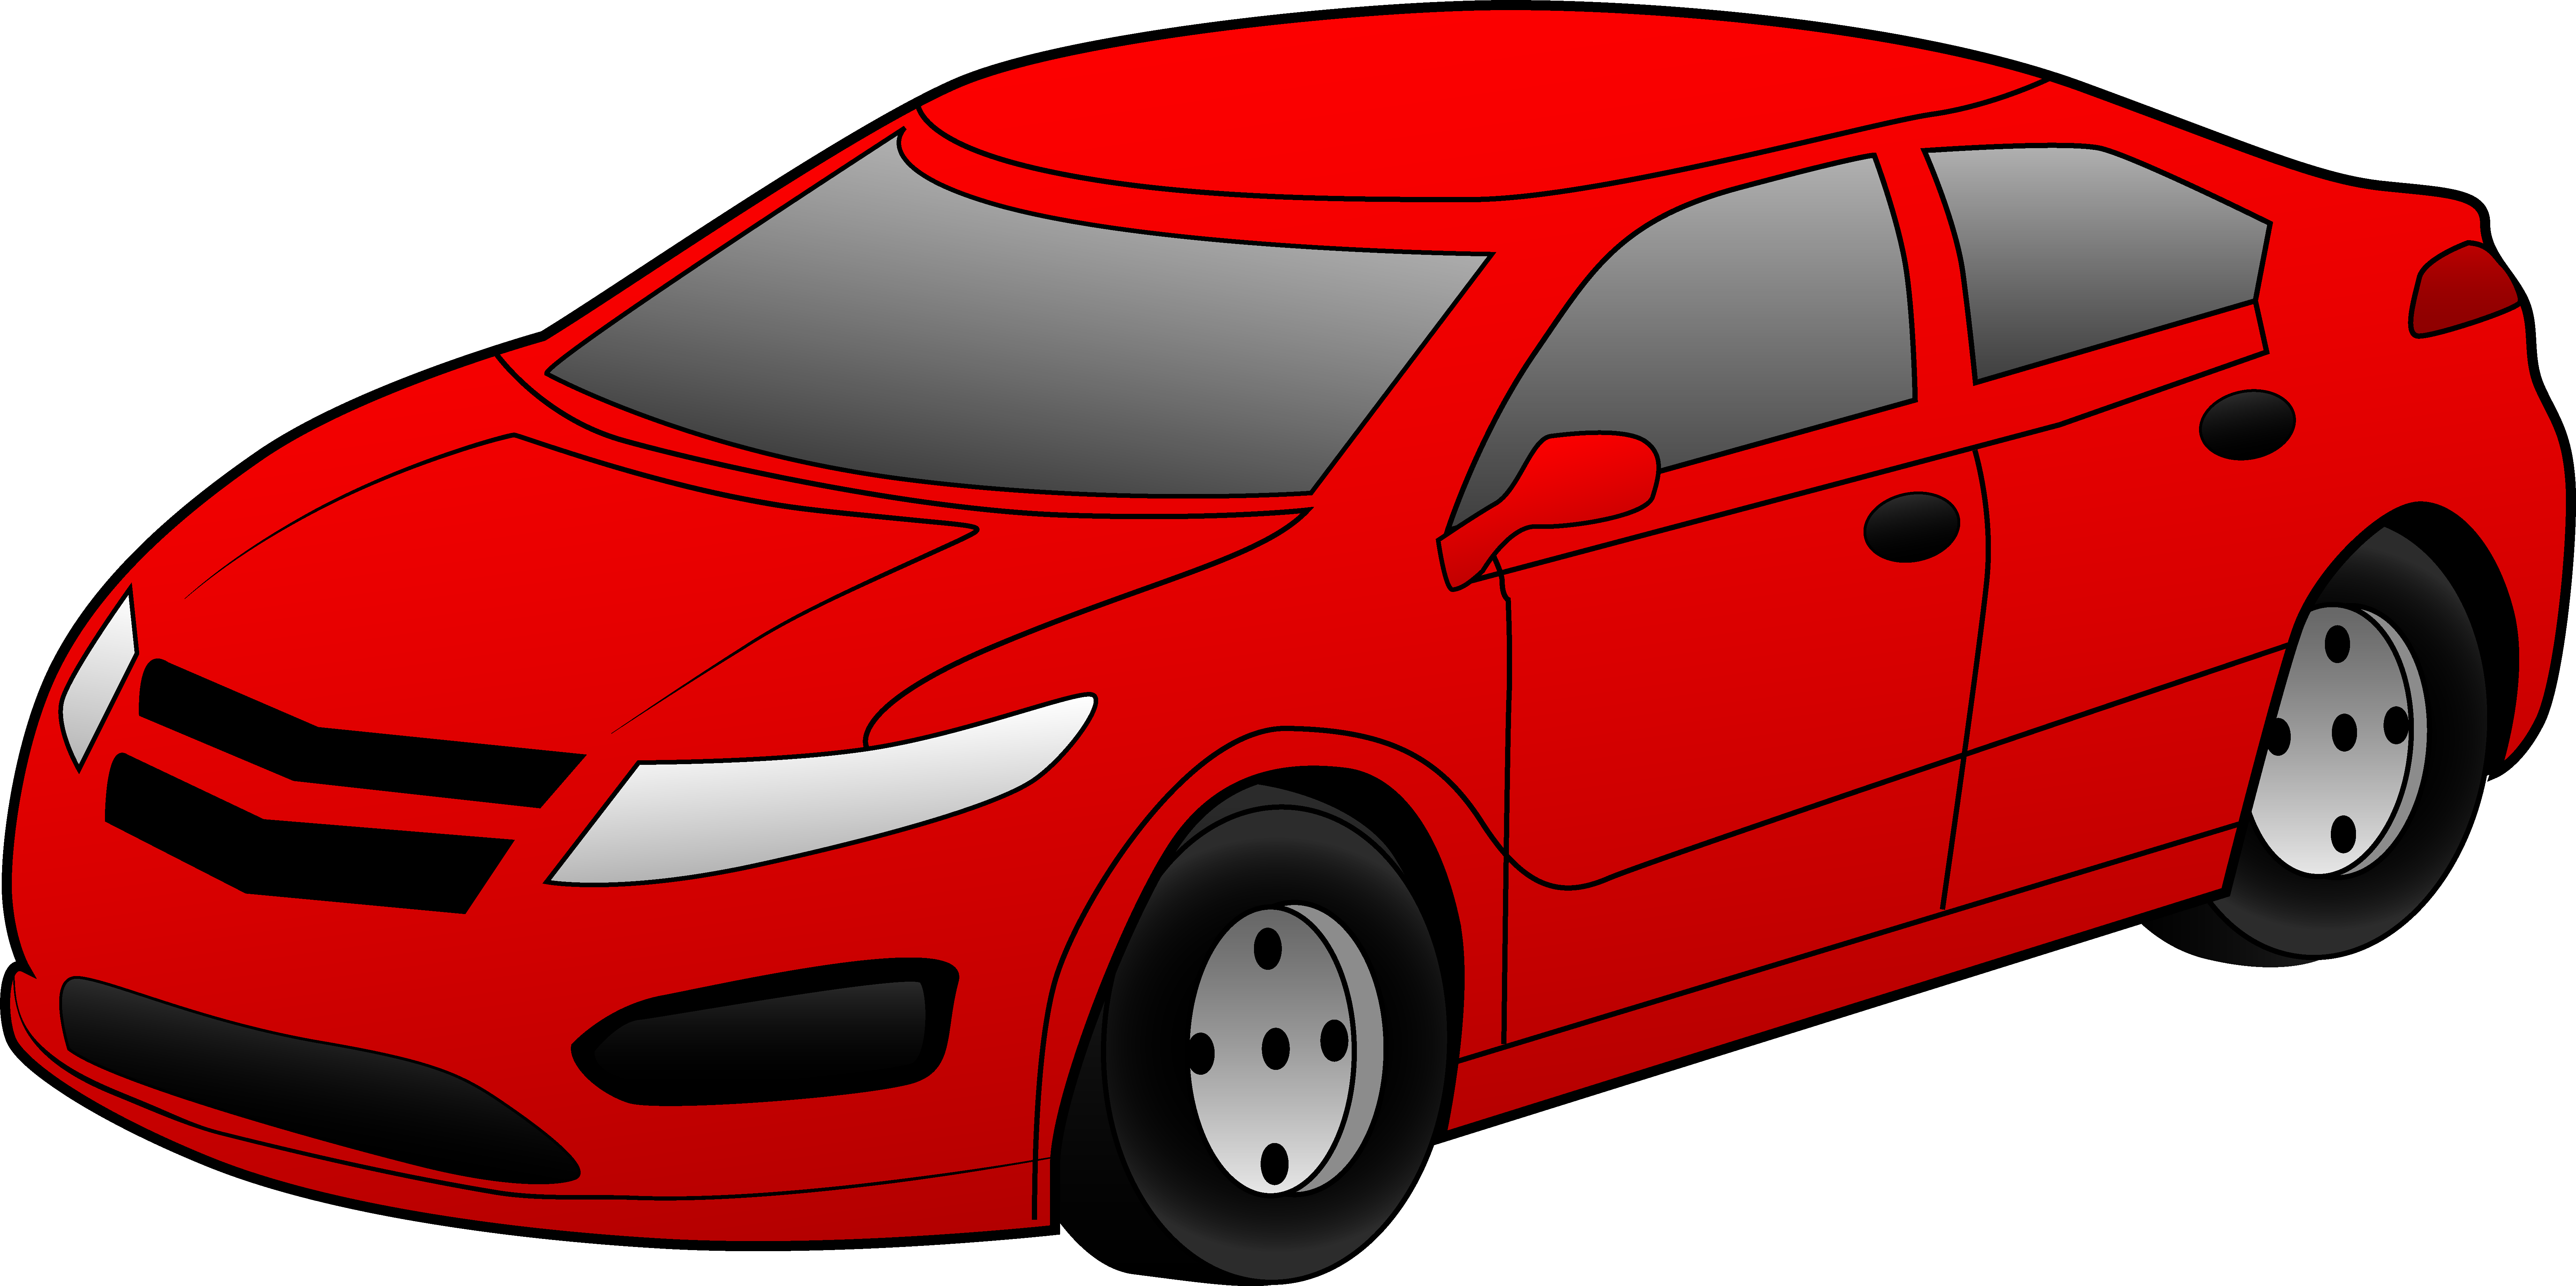 Car clipart free clipart images 3